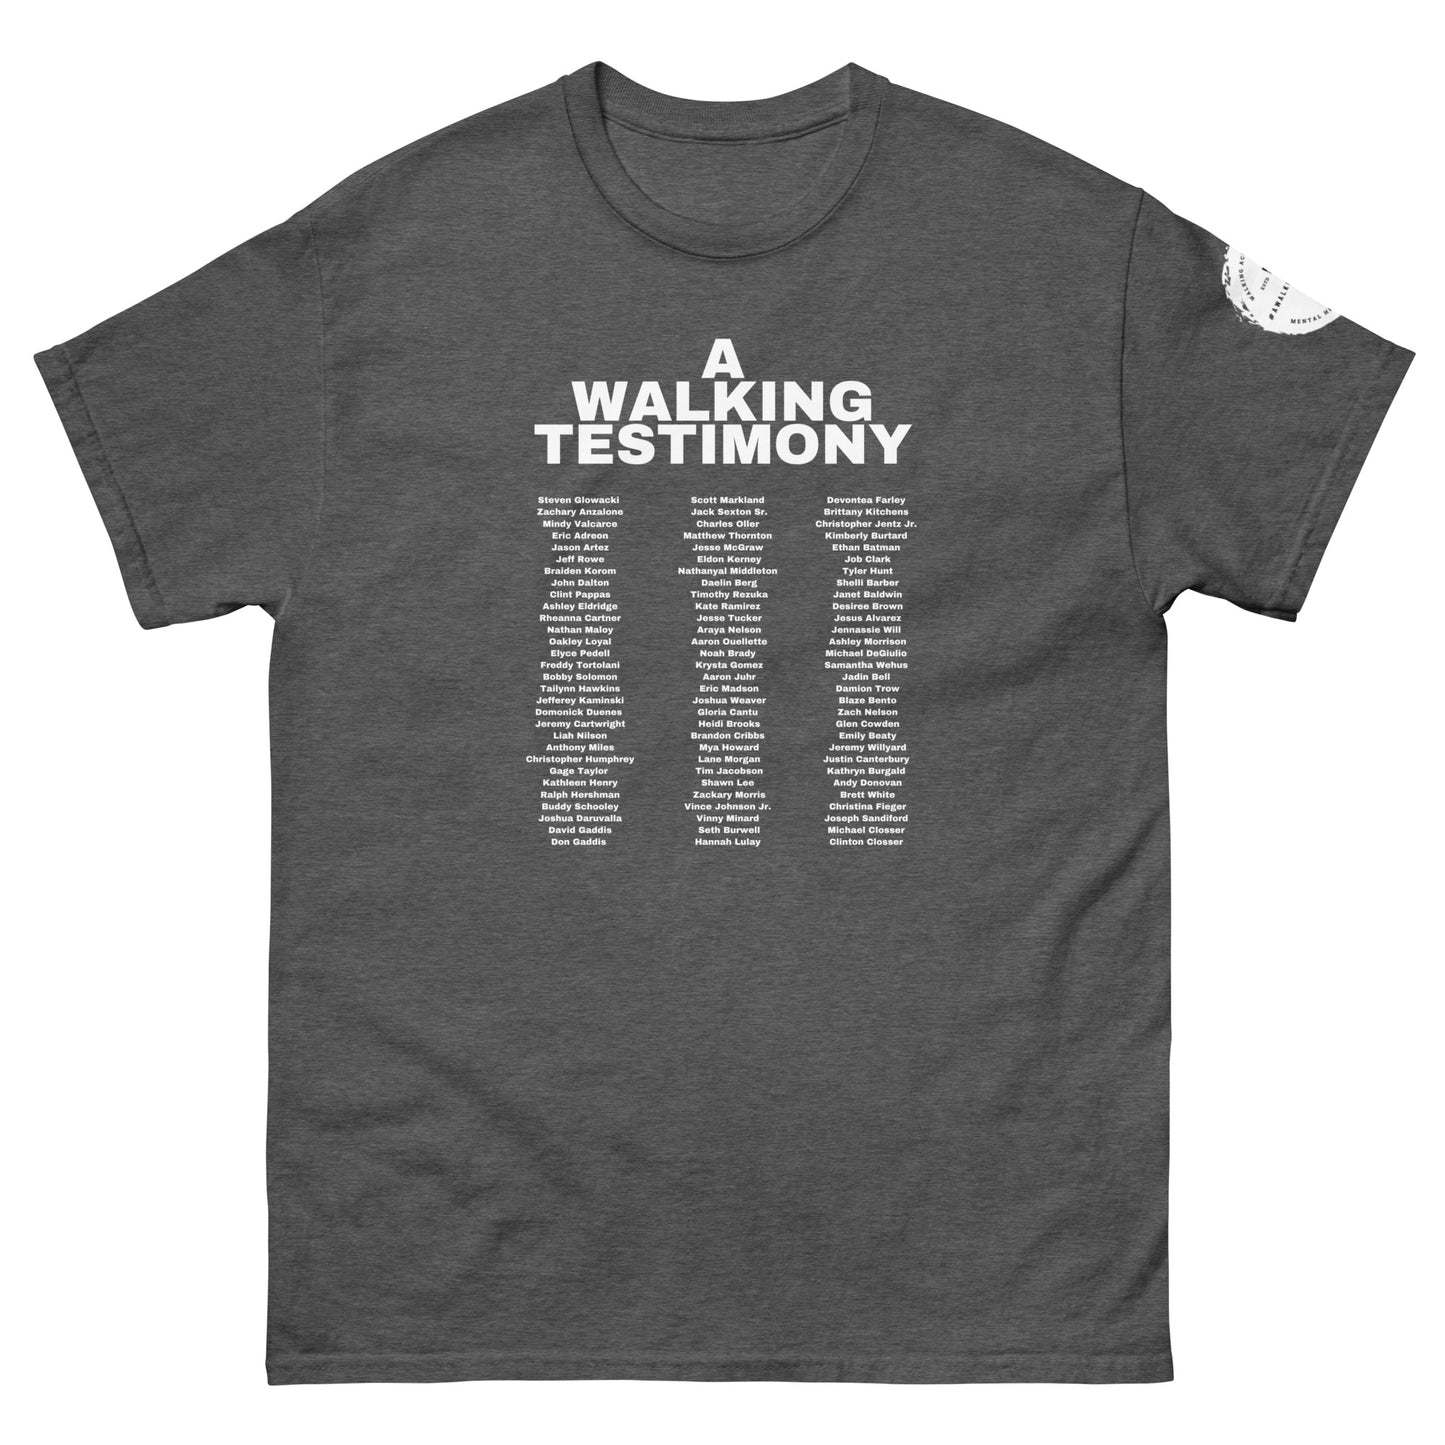 Official A Walking Testimony Shirt Edition 3 (Dark Colors)